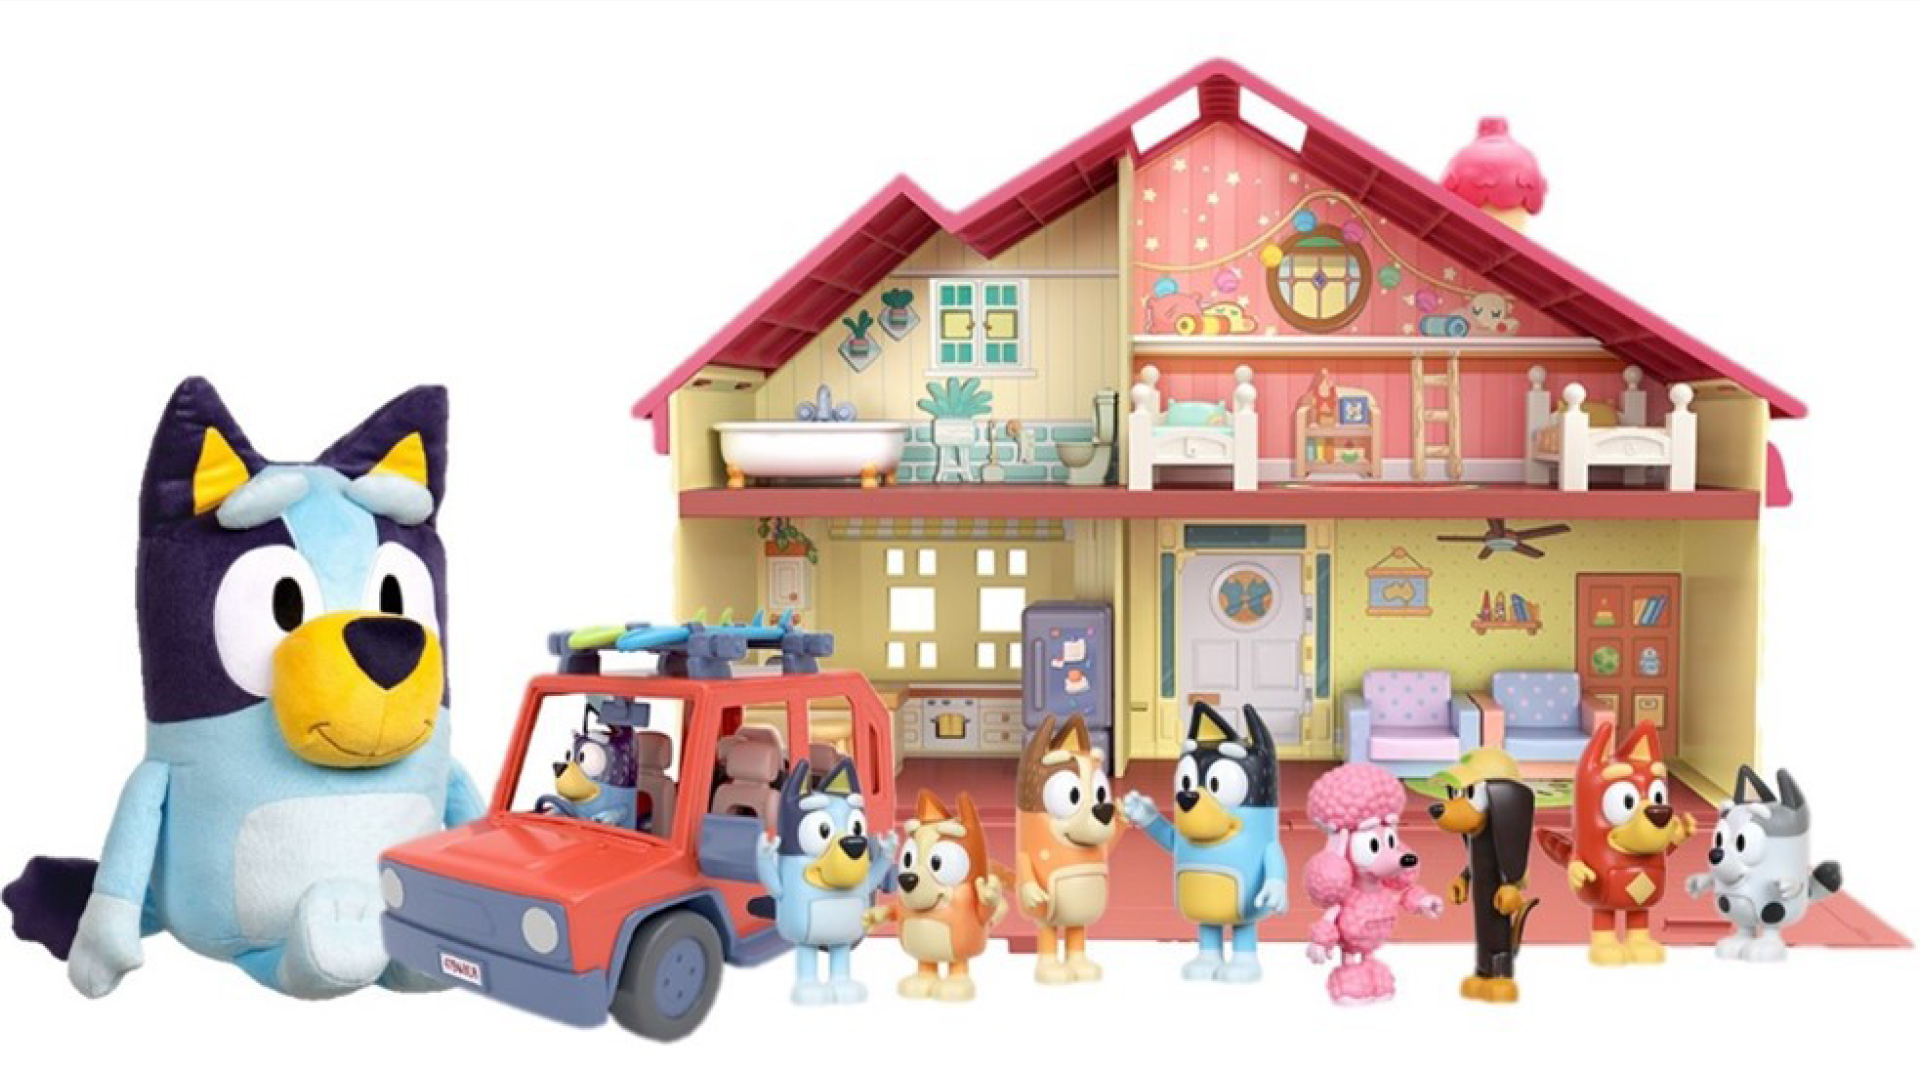 BBC Studios Launches 'Bluey' Official Toys in South Korea